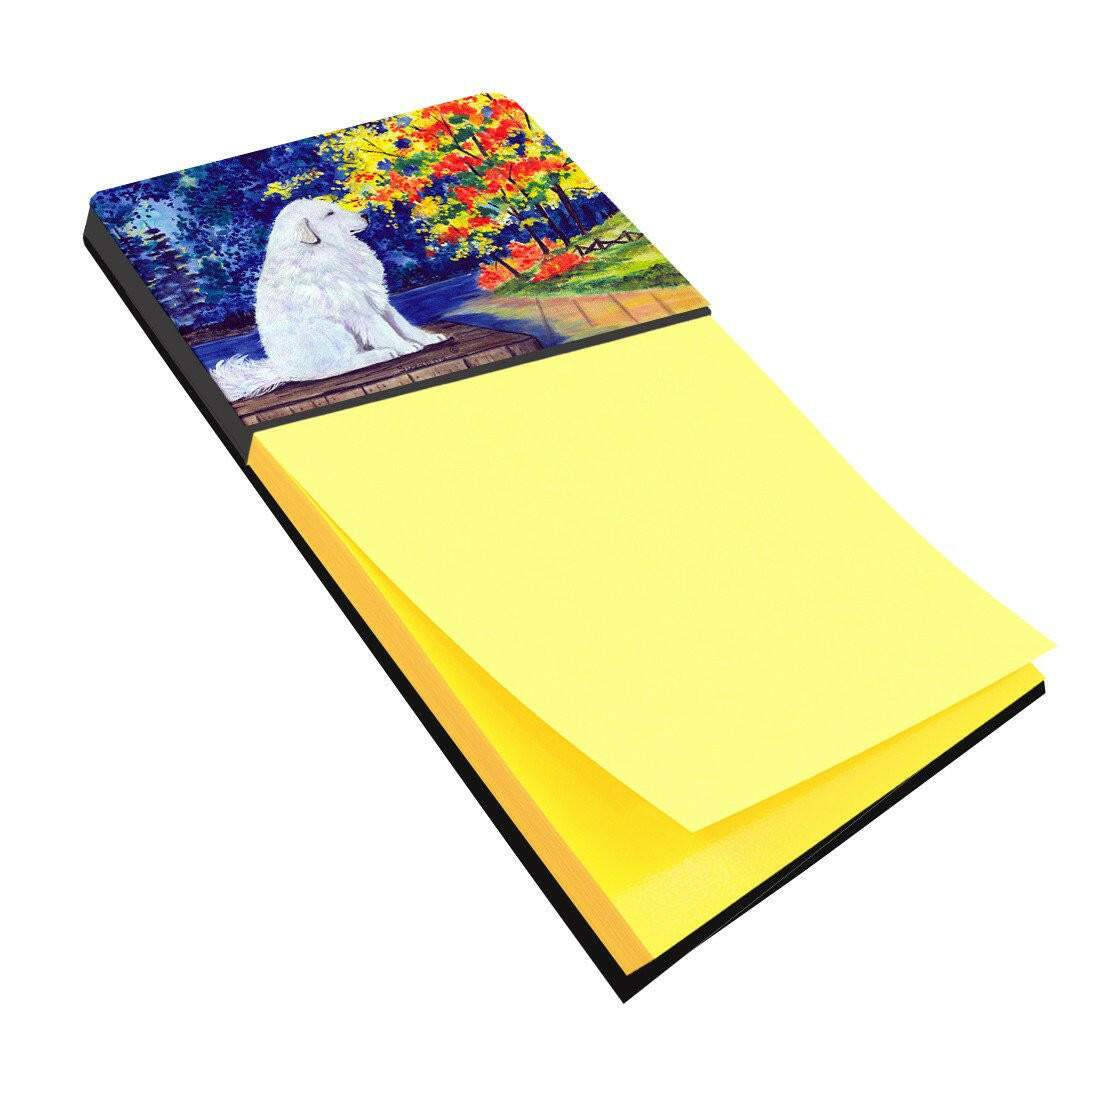 Great Pyrenees Refiillable Sticky Note Holder or Postit Note Dispenser SS8240SN by Caroline's Treasures